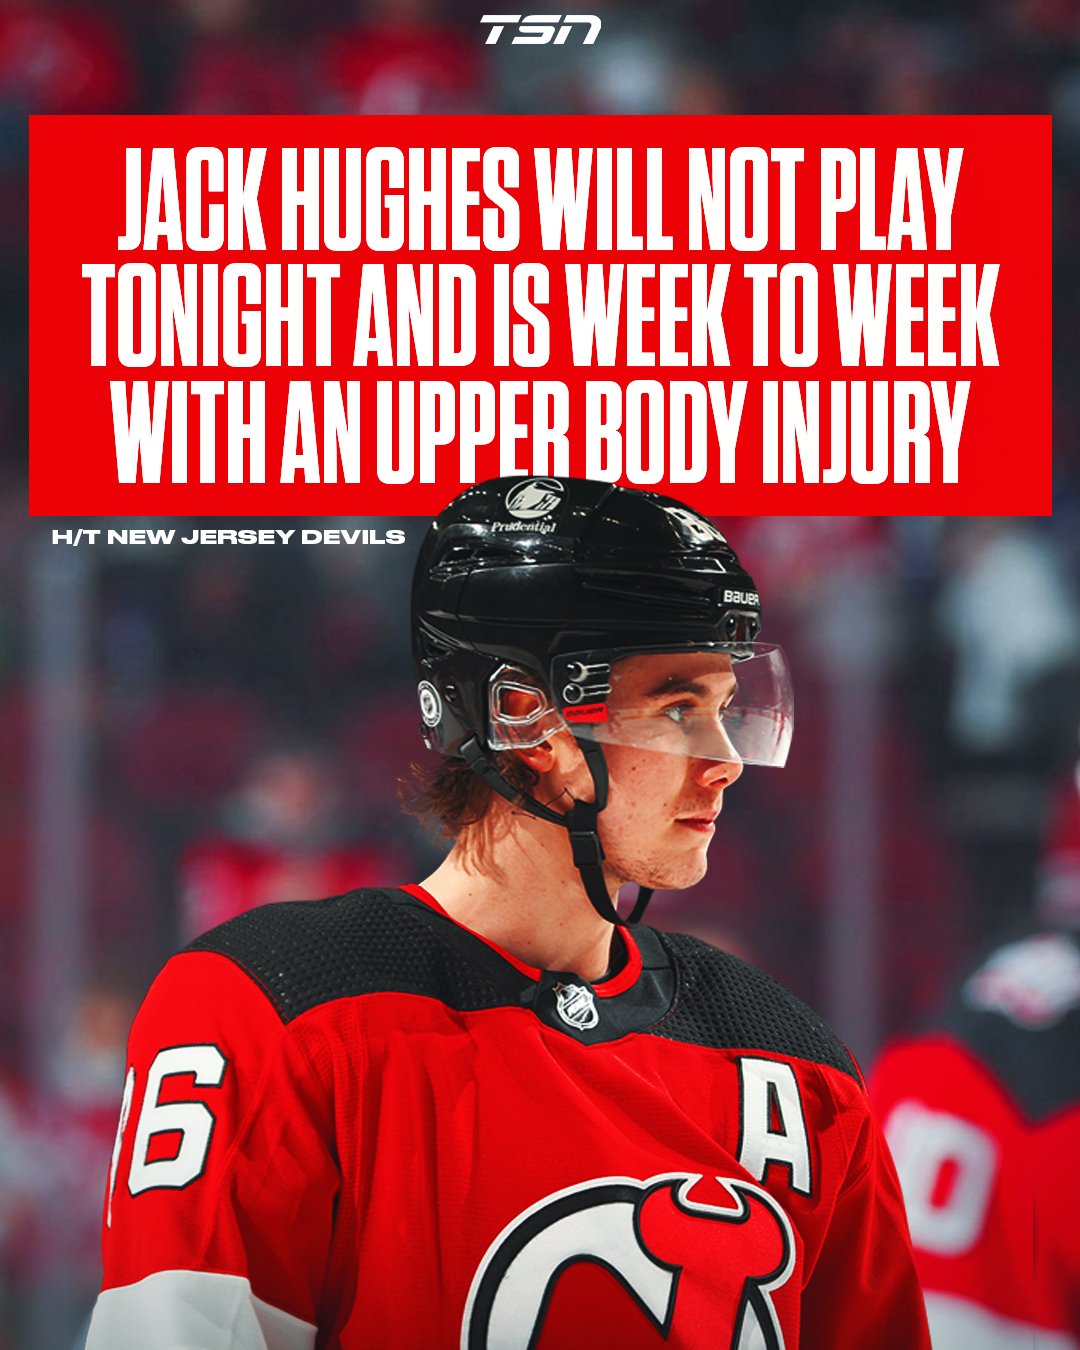 Devils All-Star Jack Hughes out with upper-body injury - NBC Sports